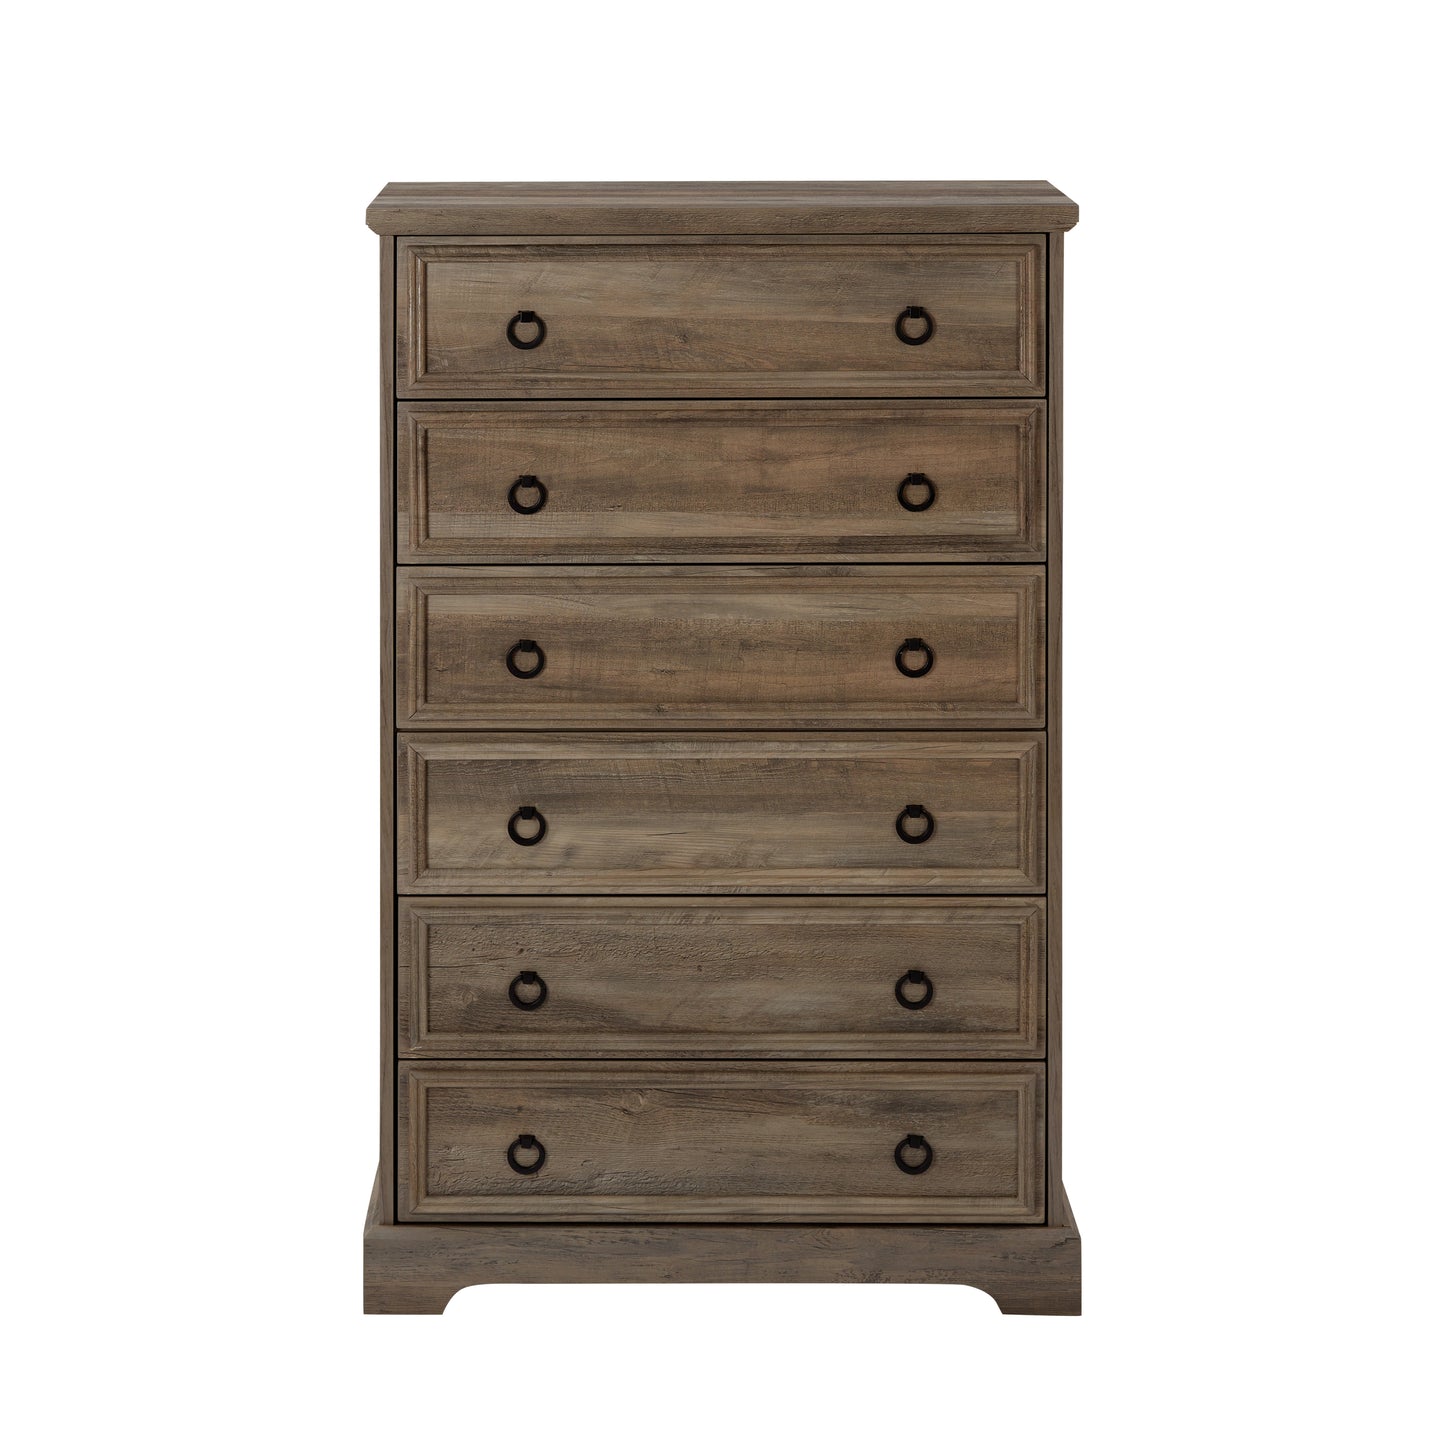 Modern 6 Drawer Dresser, Dressers for Bedroom, Tall Chest of Drawers Closet Organizers & Storage Clothes - Easy Pull Handle, Textured Borders Living Room, Hallway,L 29.53''*W15.75''*H48.03''